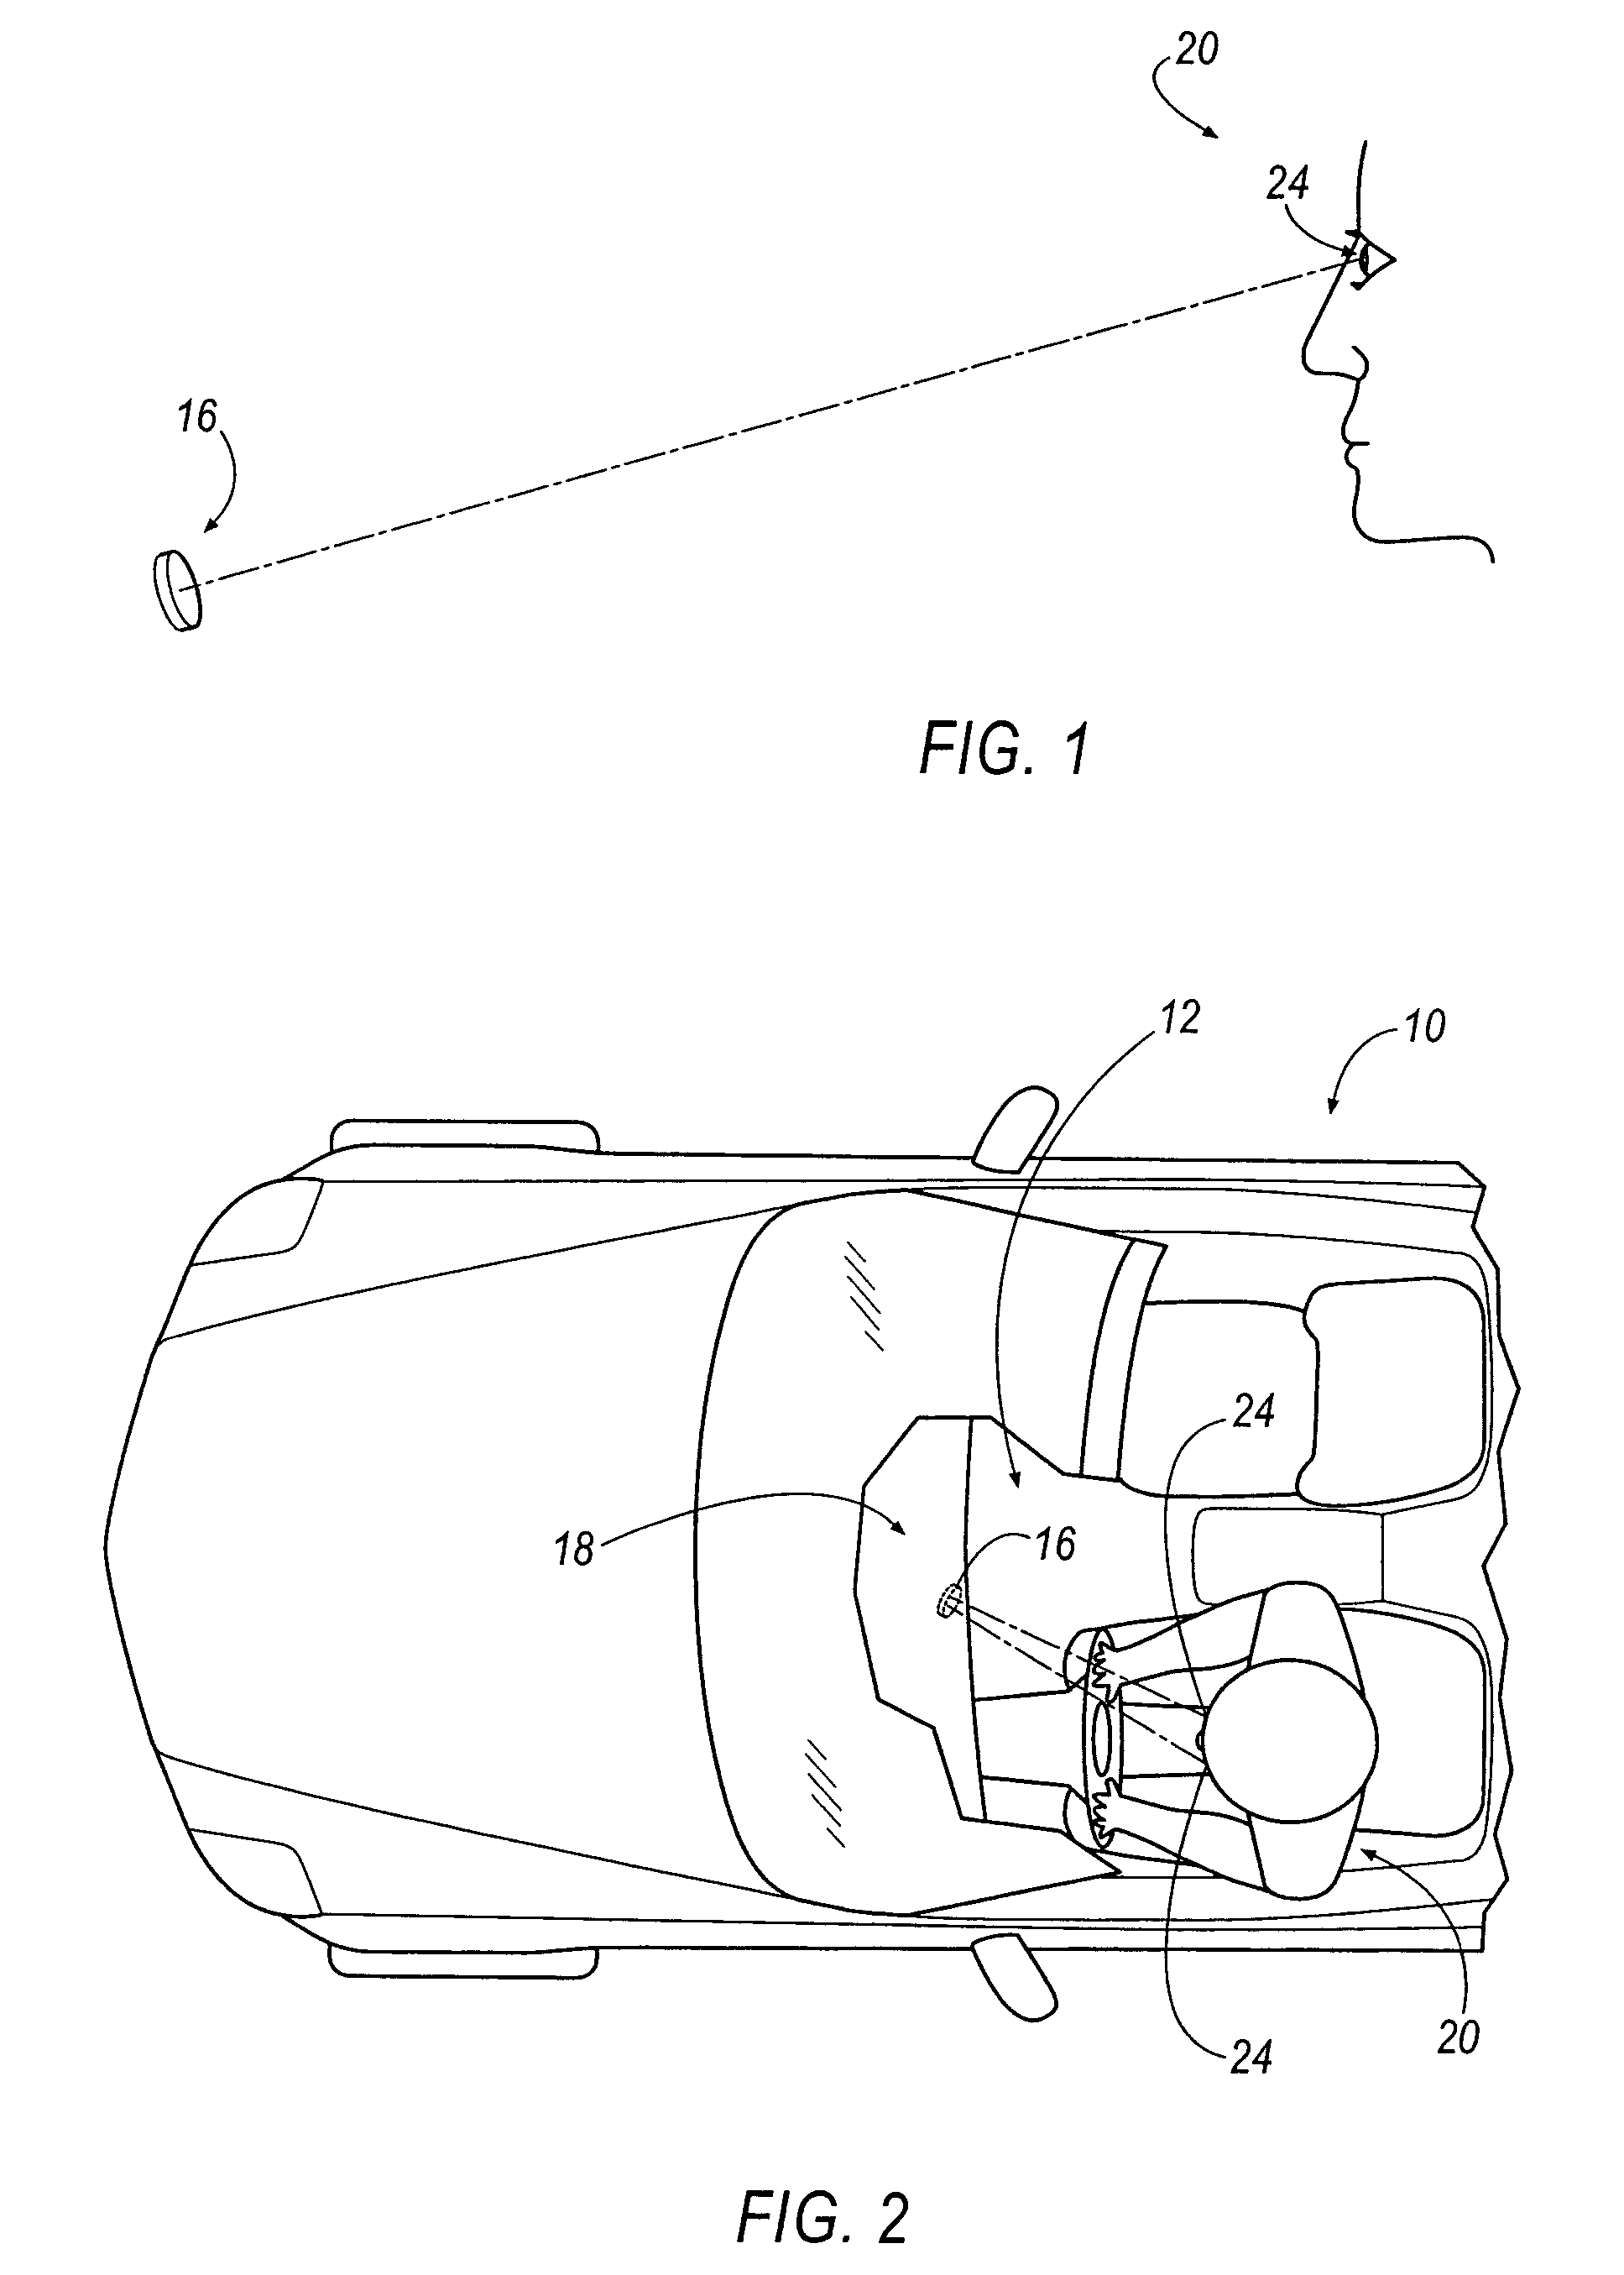 Method of mitigating driver distraction